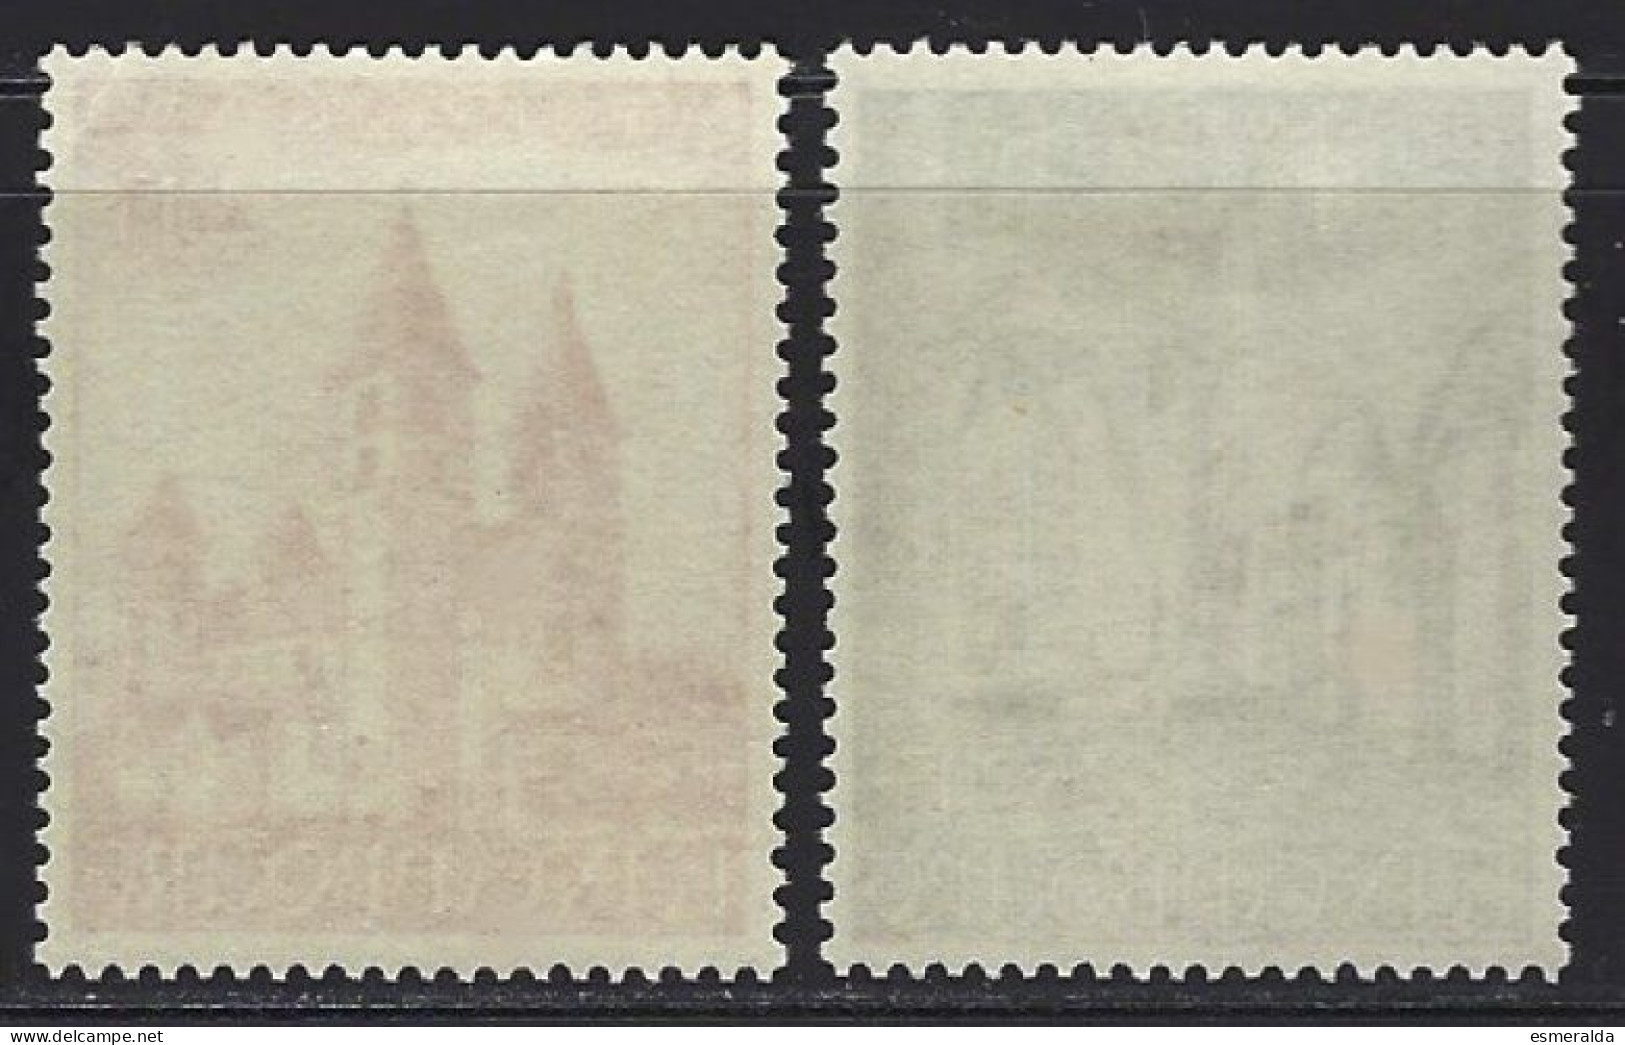 Luxembourg Yv 473/4,Basilique D'Echternach. **/mnh - Unused Stamps